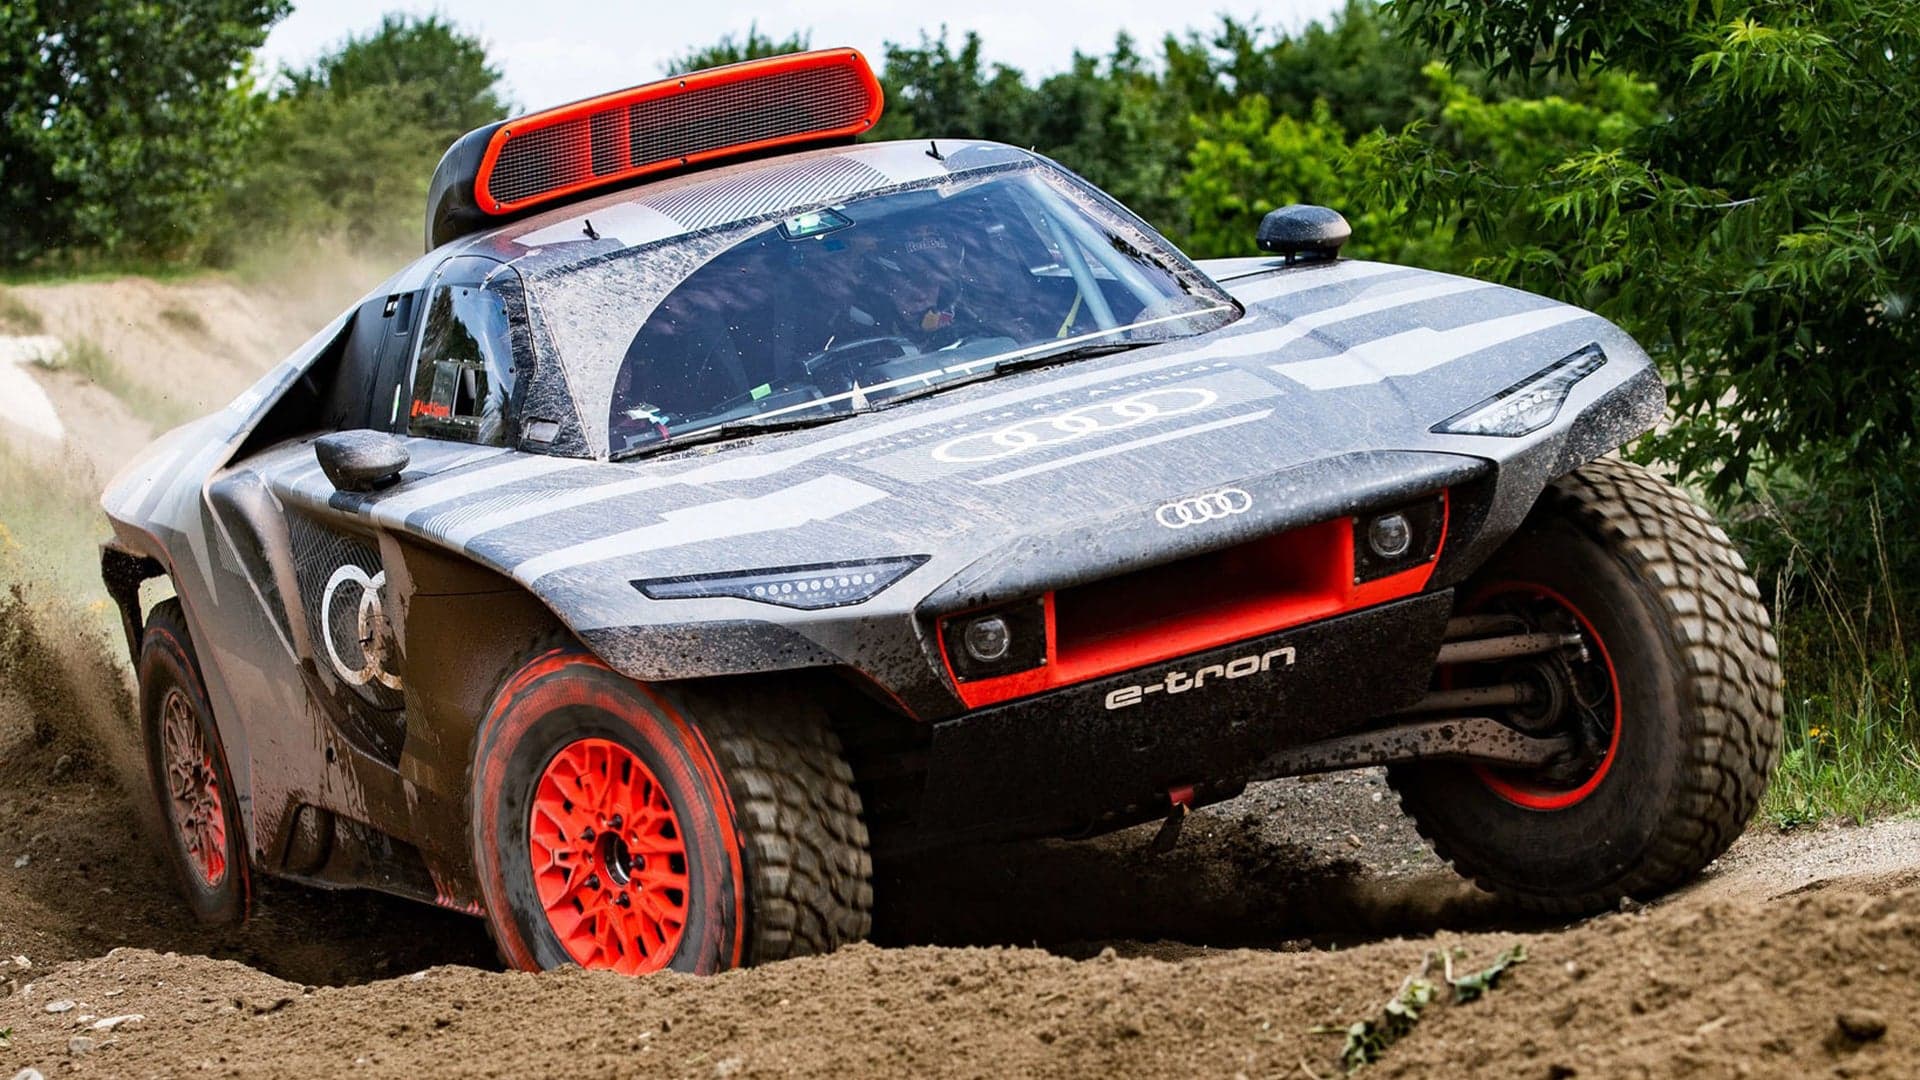 Audi Is Taking on Dakar With This Badass E-Tron Rally Truck